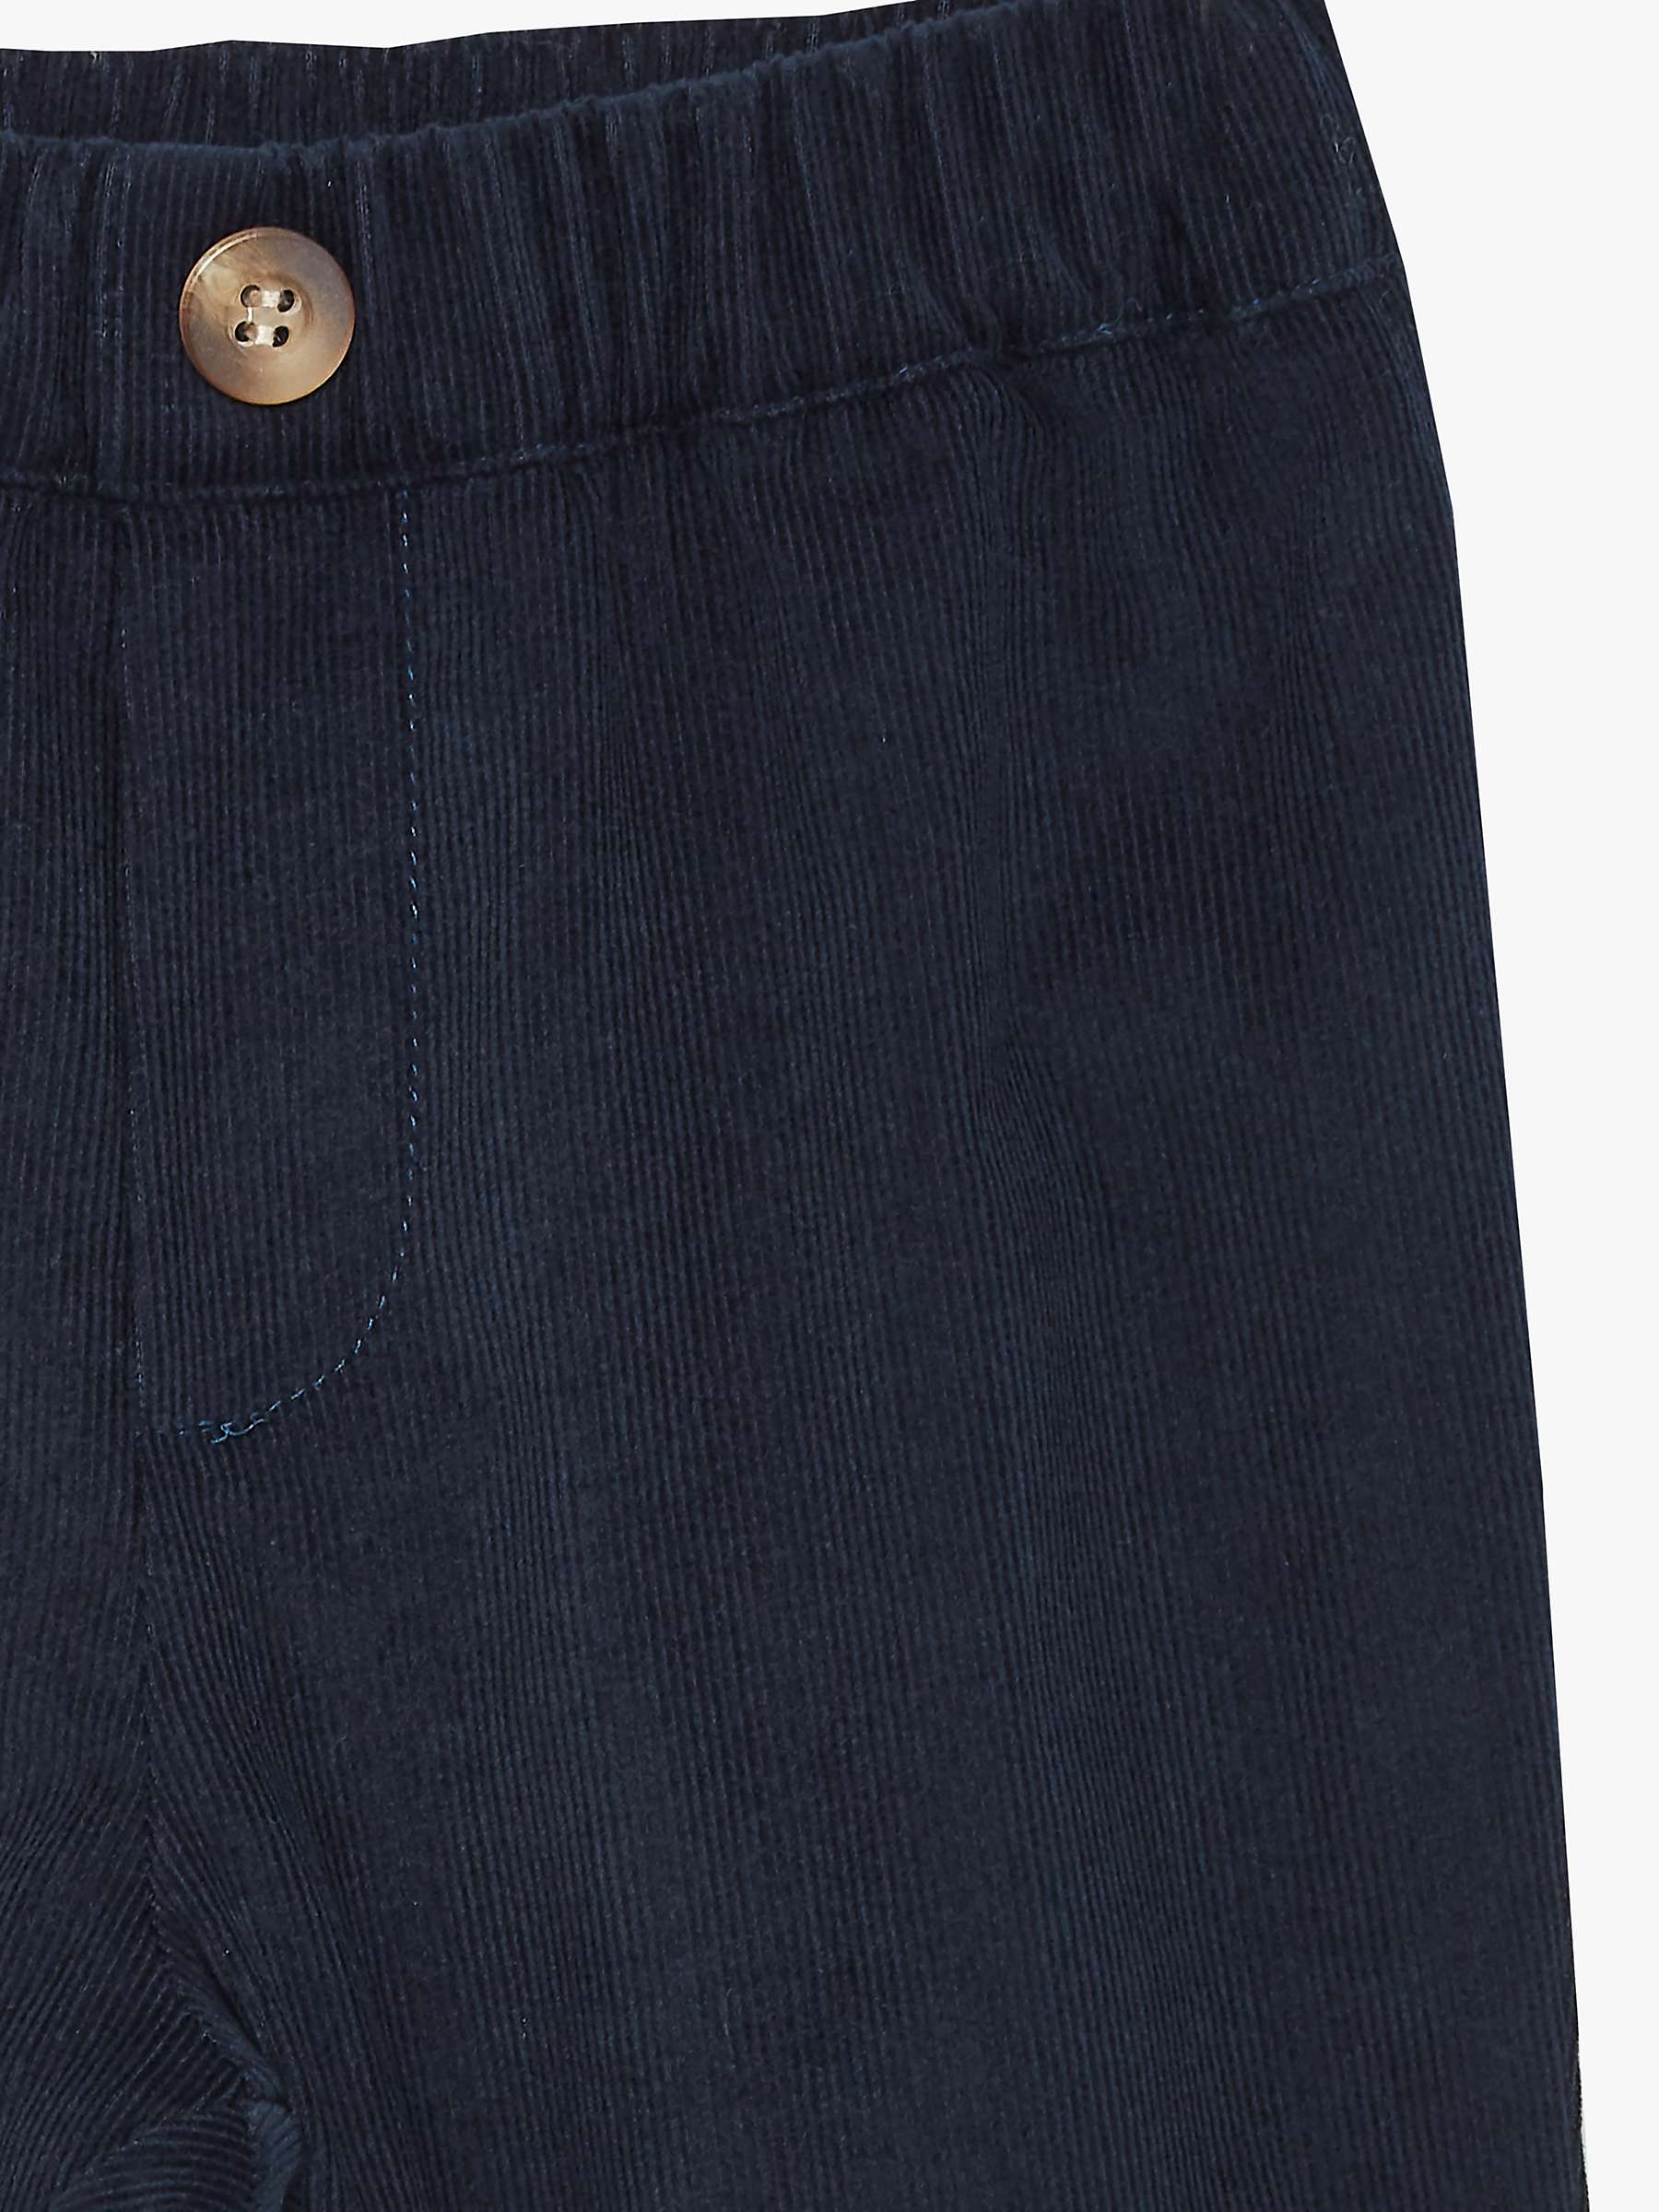 Buy Trotters Baby Orly Cotton Needle Cord Trousers, Navy Online at johnlewis.com